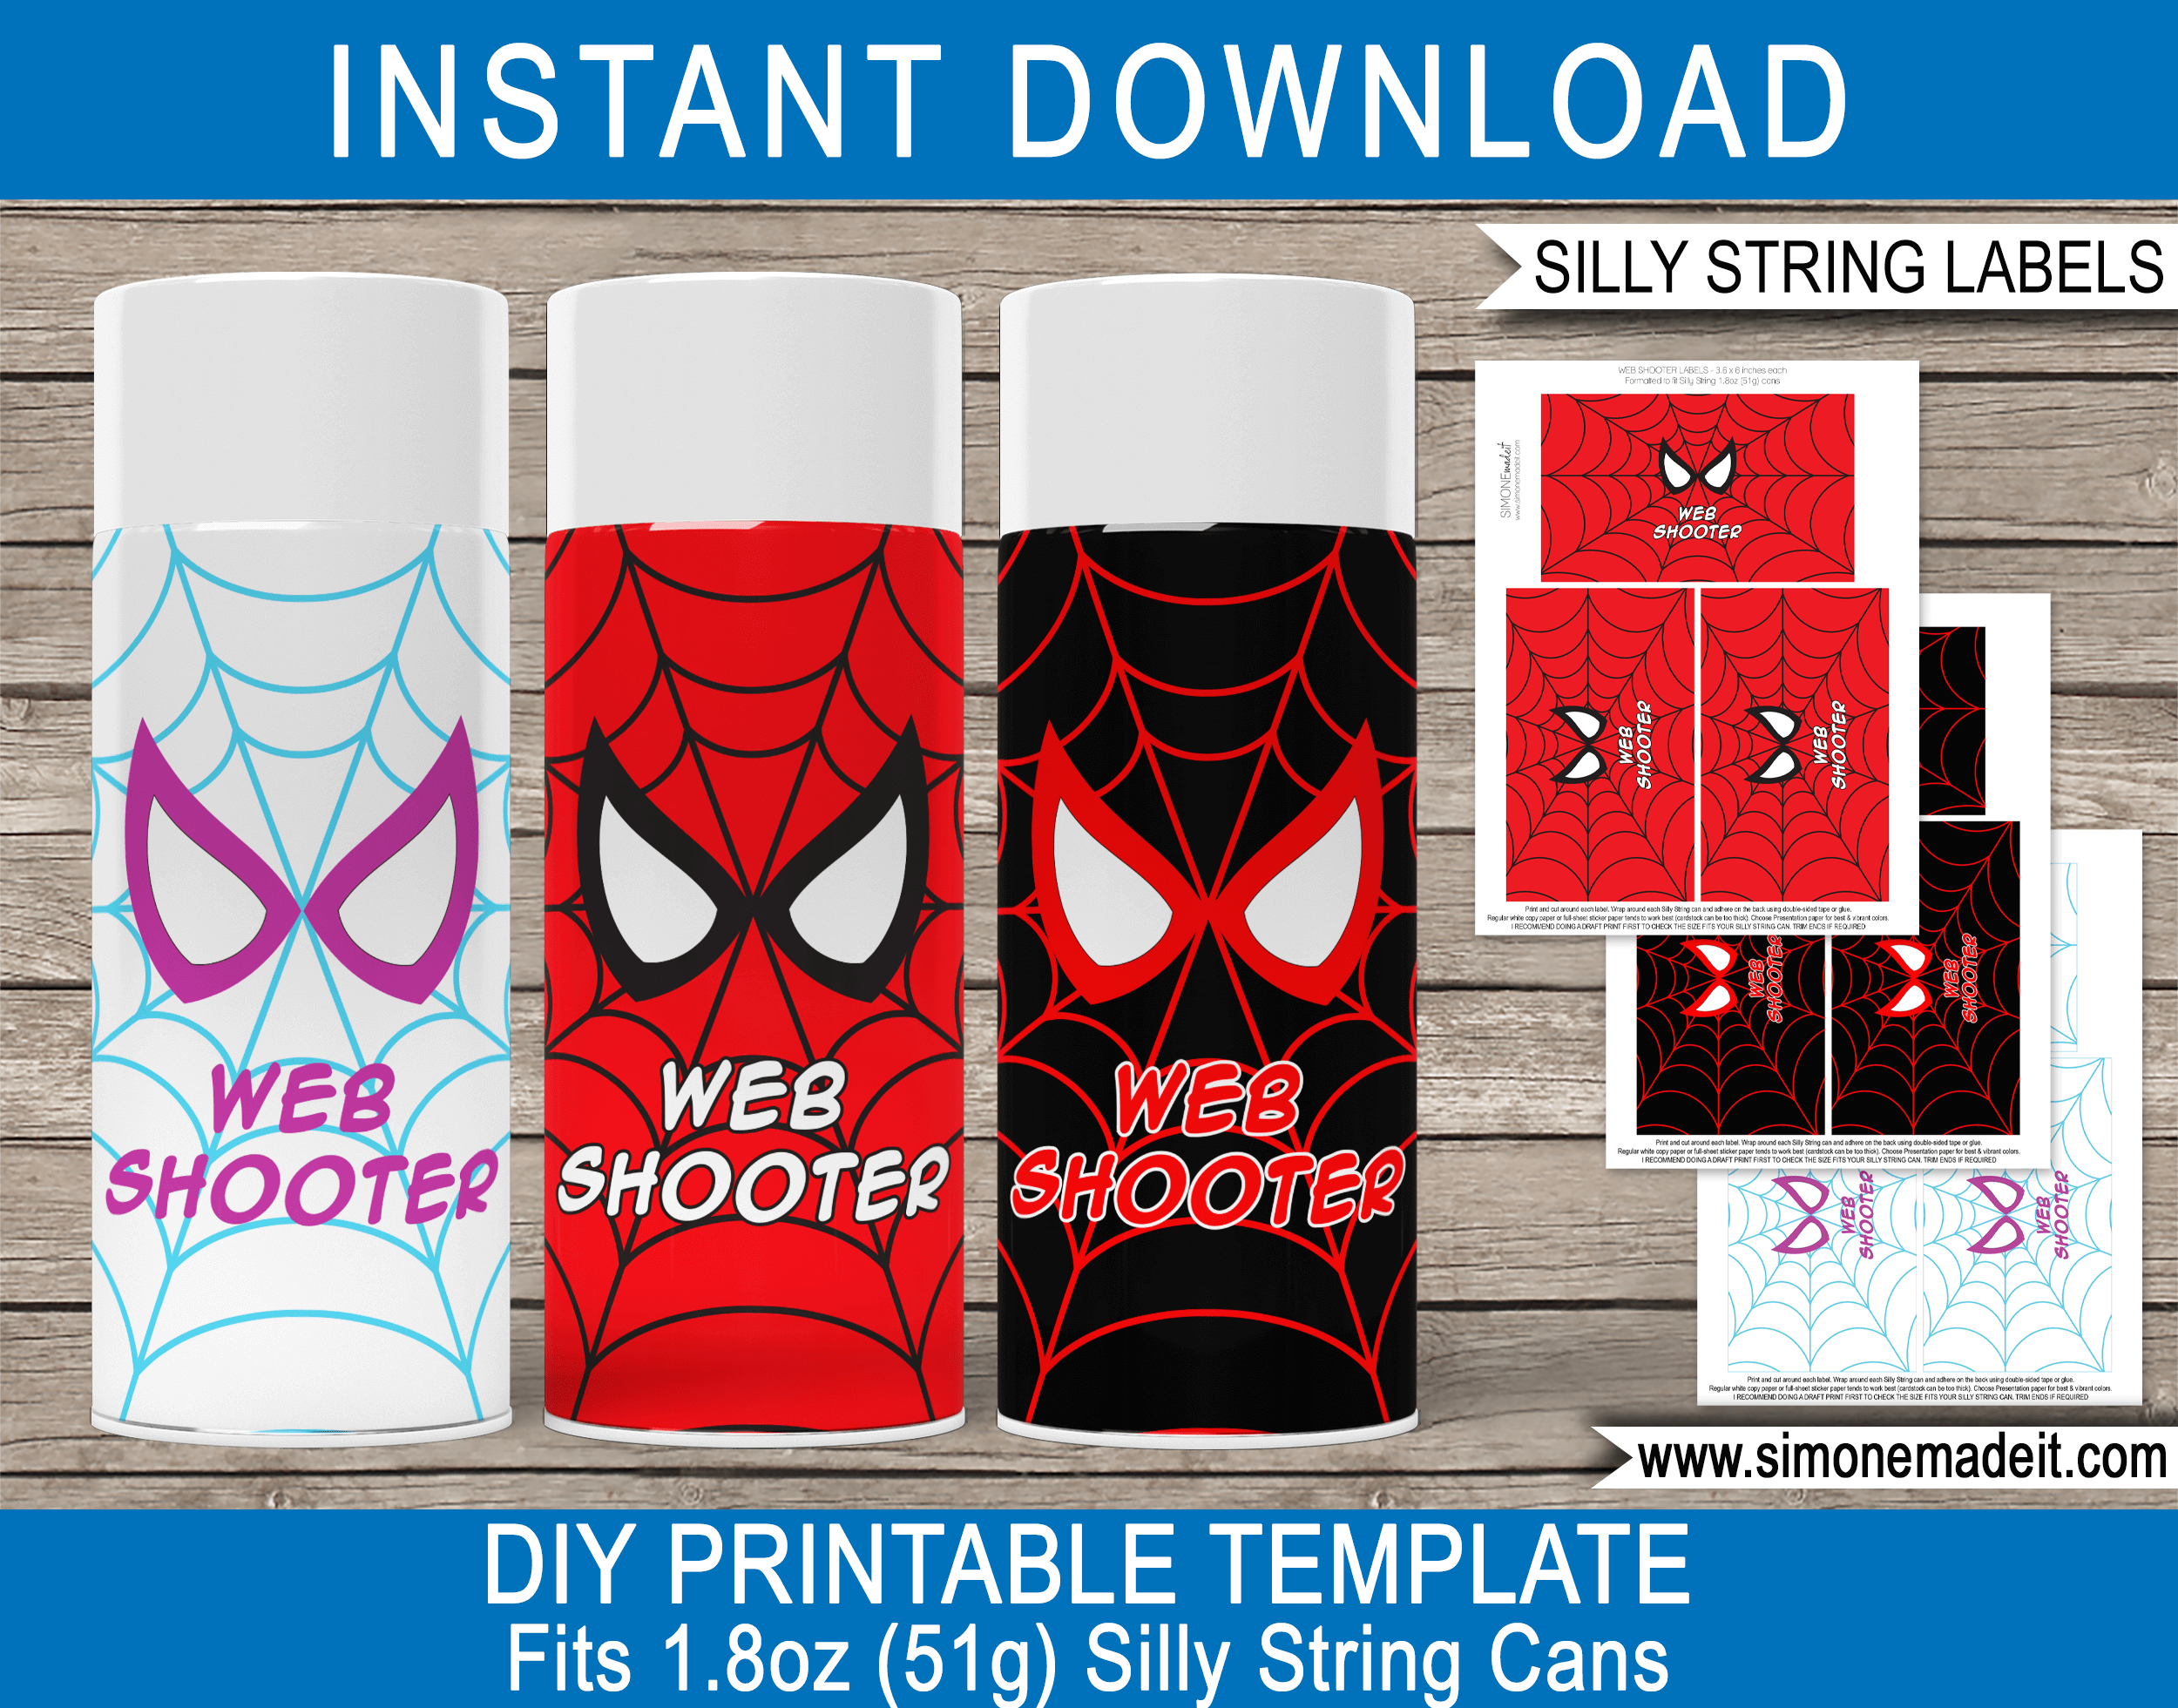 Printable Web Shooter Silly String Labels Template Bundle | Spiderman, Miles Morales, Gwen Ghost Spider | Superhero Birthday Party Games, Activities & Favors | DIY Spider Web Template | Goofy String | via SIMONEmadeit.com